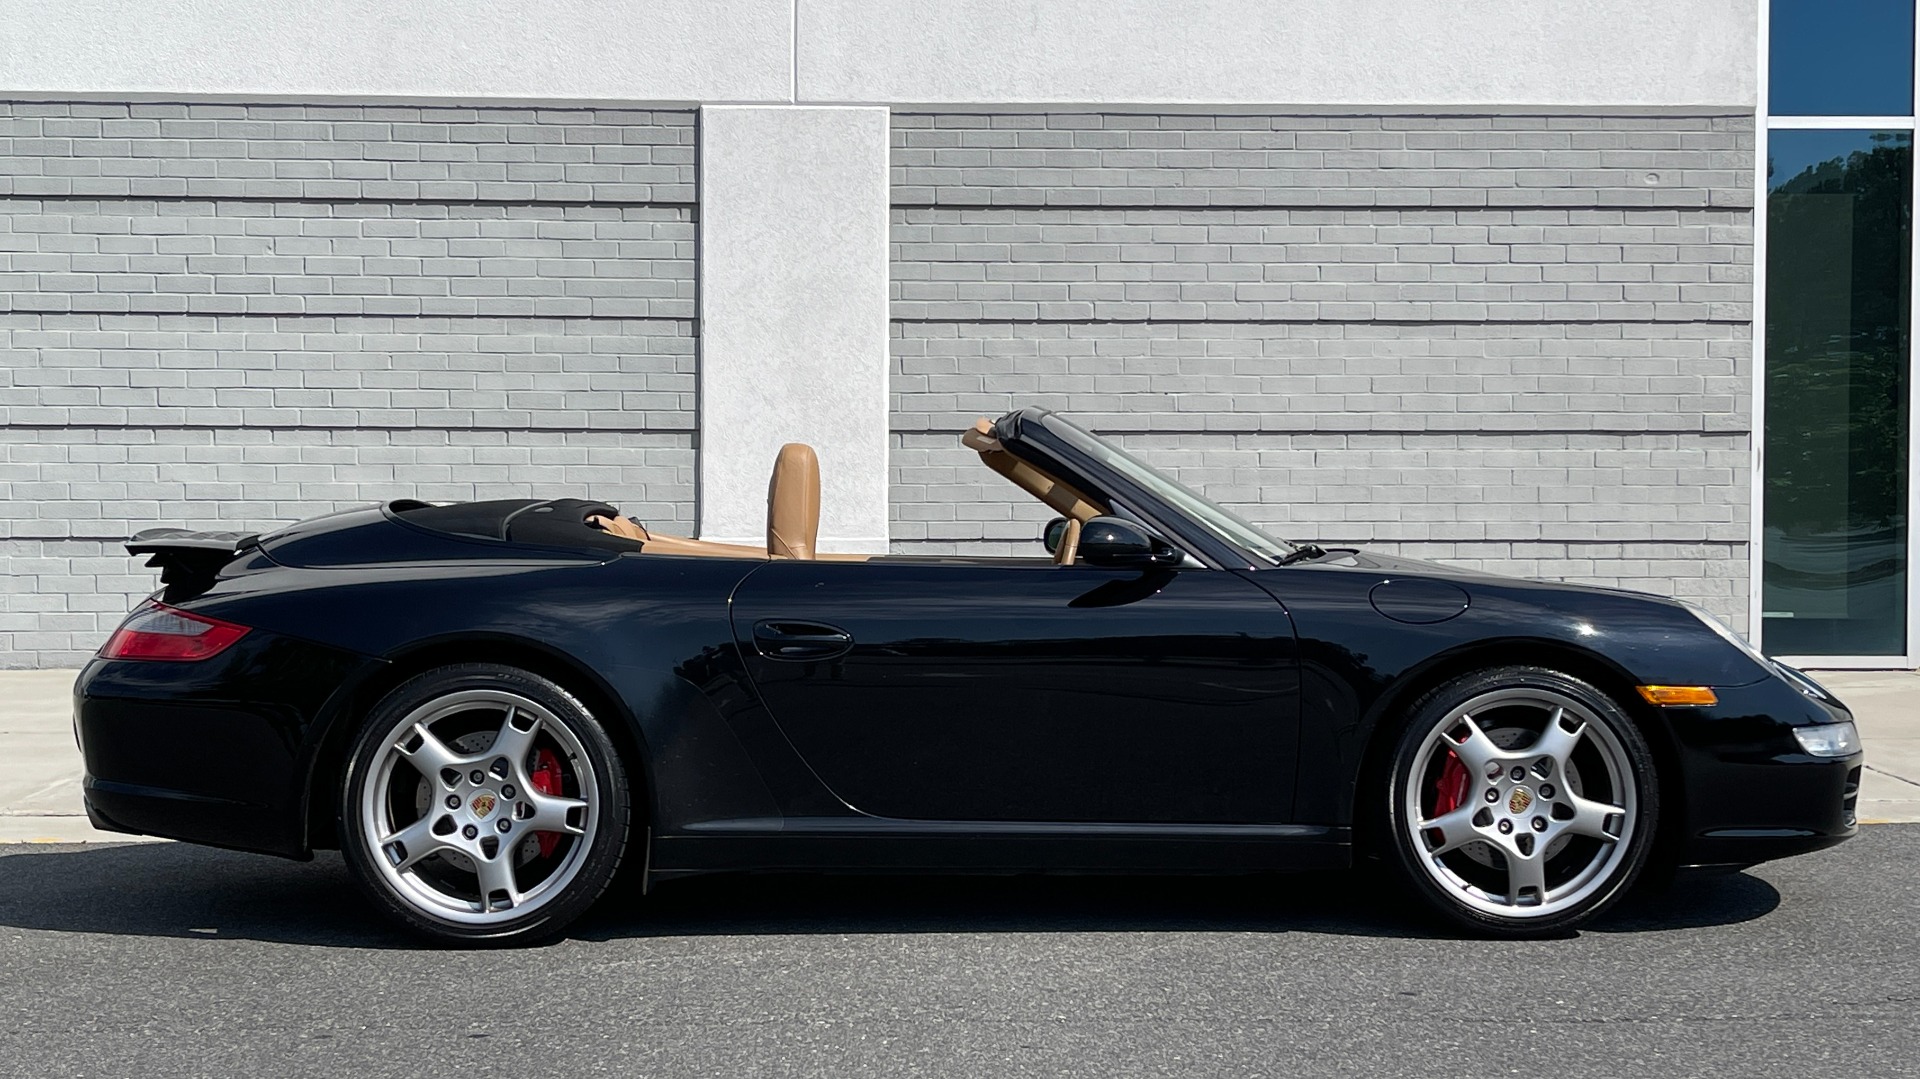 Used 2006 Porsche 911 CARRERA S CABRIOLET / BOSE / CD CHANGER / PWR SEAT PKG / HTD STS for sale $56,400 at Formula Imports in Charlotte NC 28227 3